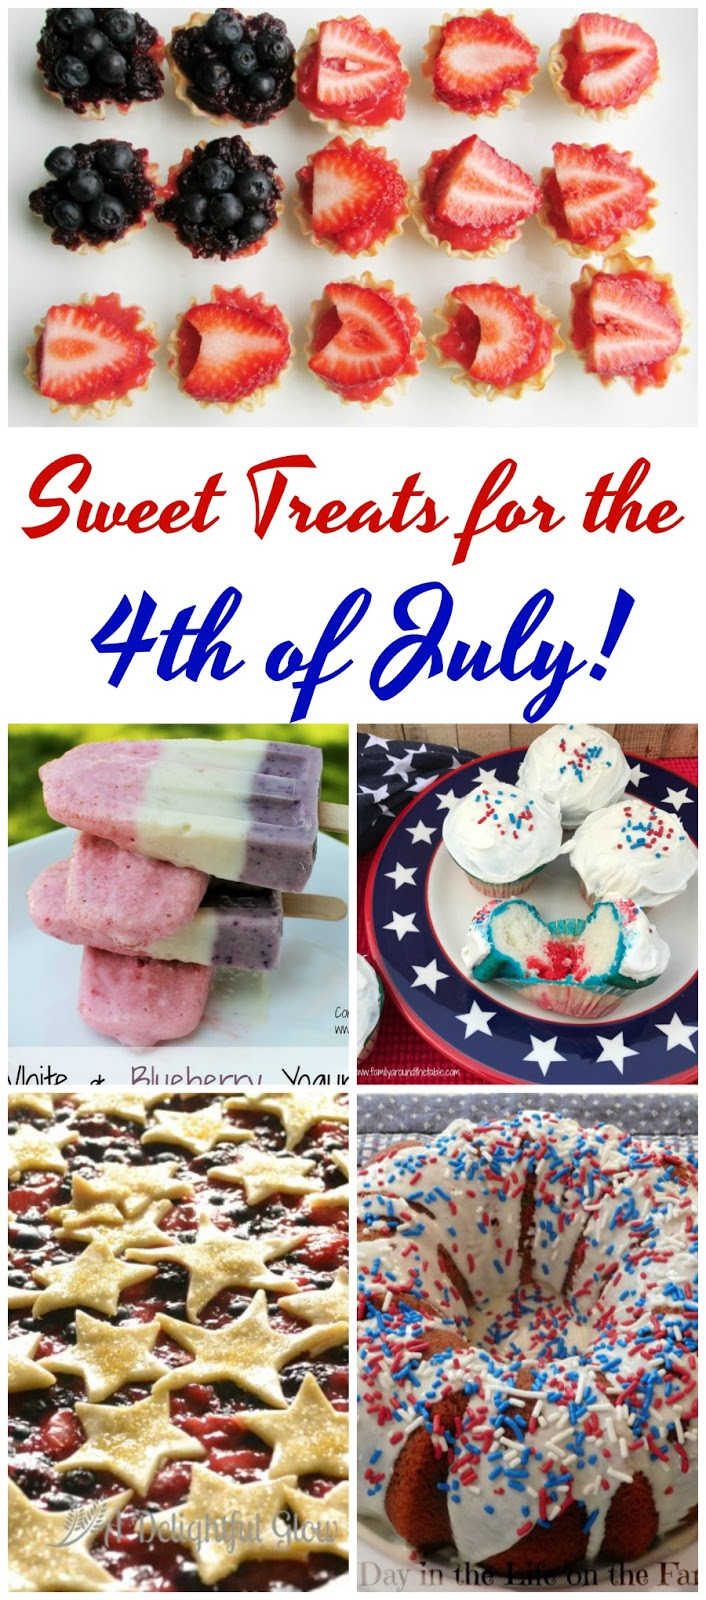 4Th Of July Appetizers And Side Dishes
 Cooking With Carlee 12 Fun Ideas for the 4th of July